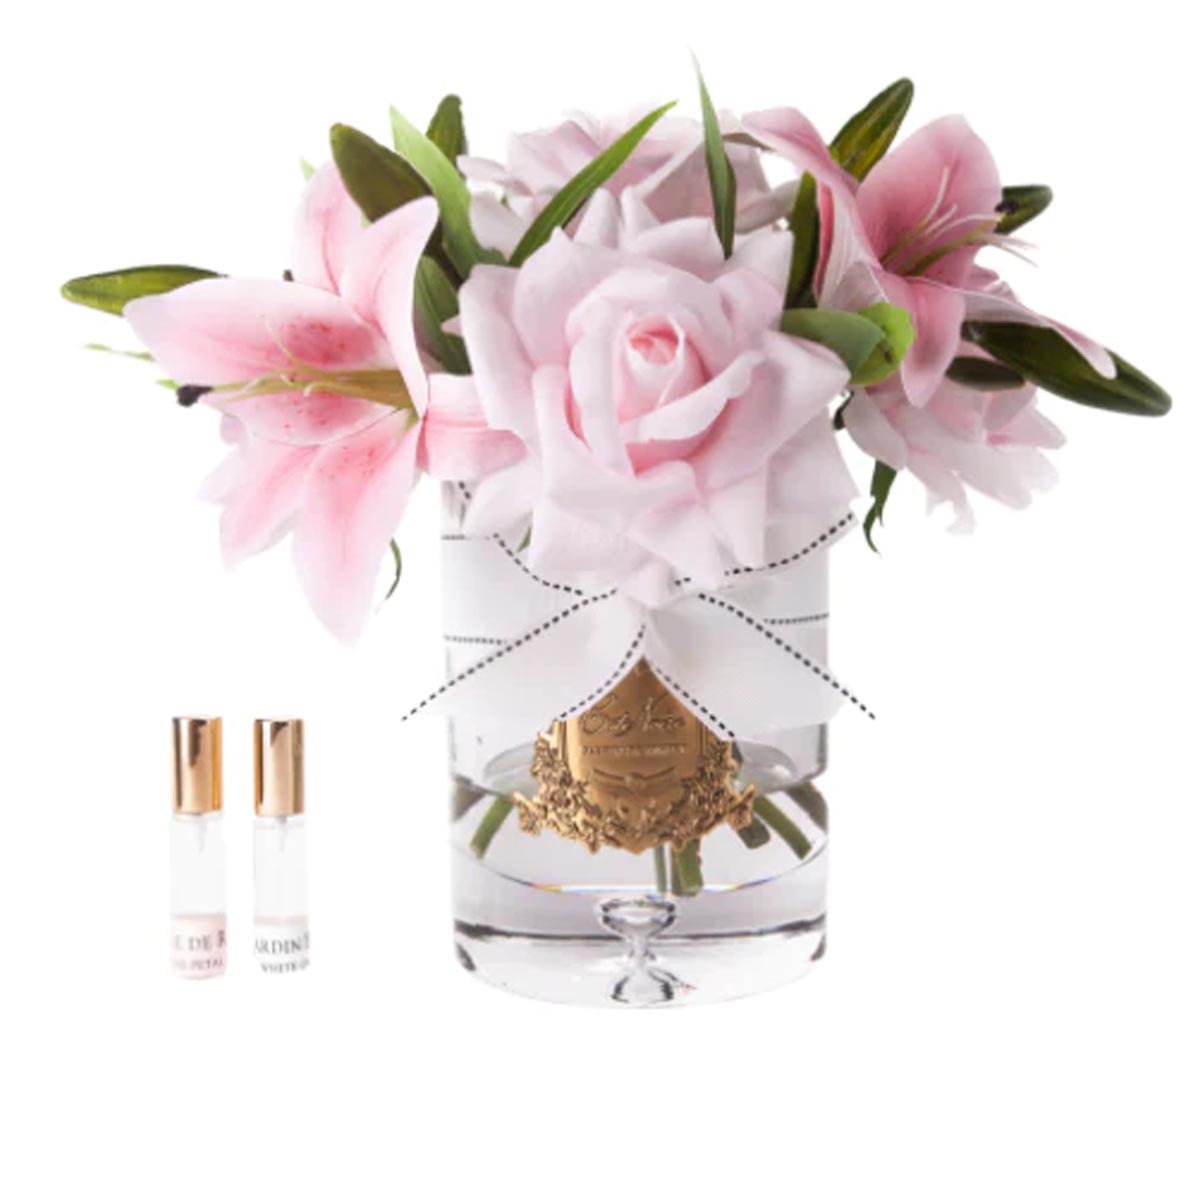 COTE NOIR LUXURY LILIES & ROSES - PINK - GOLD BADGE - PINK BOX 